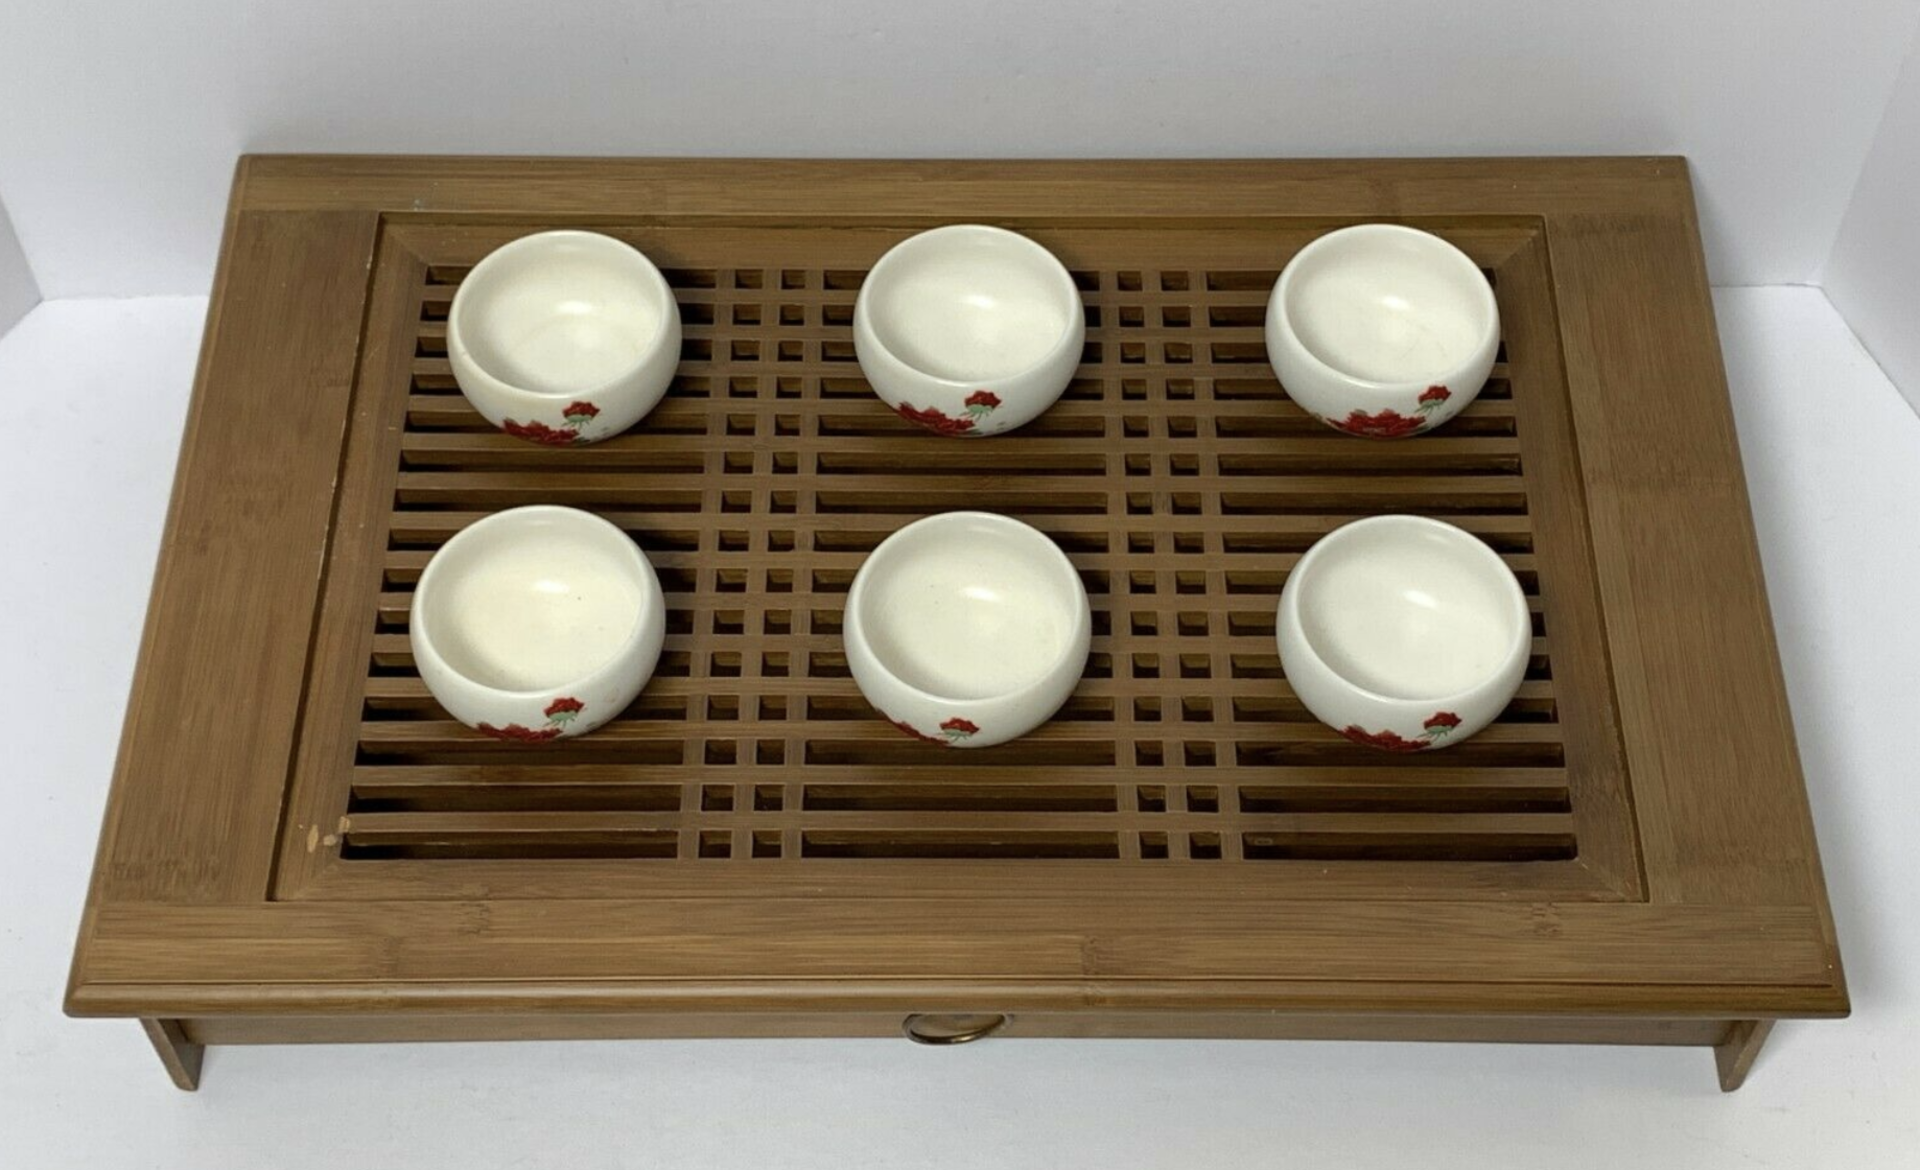 Eilong Taiwan 1987 Tea Cup Set of 6, with Wood Display Storage Unit with Drawer - Image 2 of 7